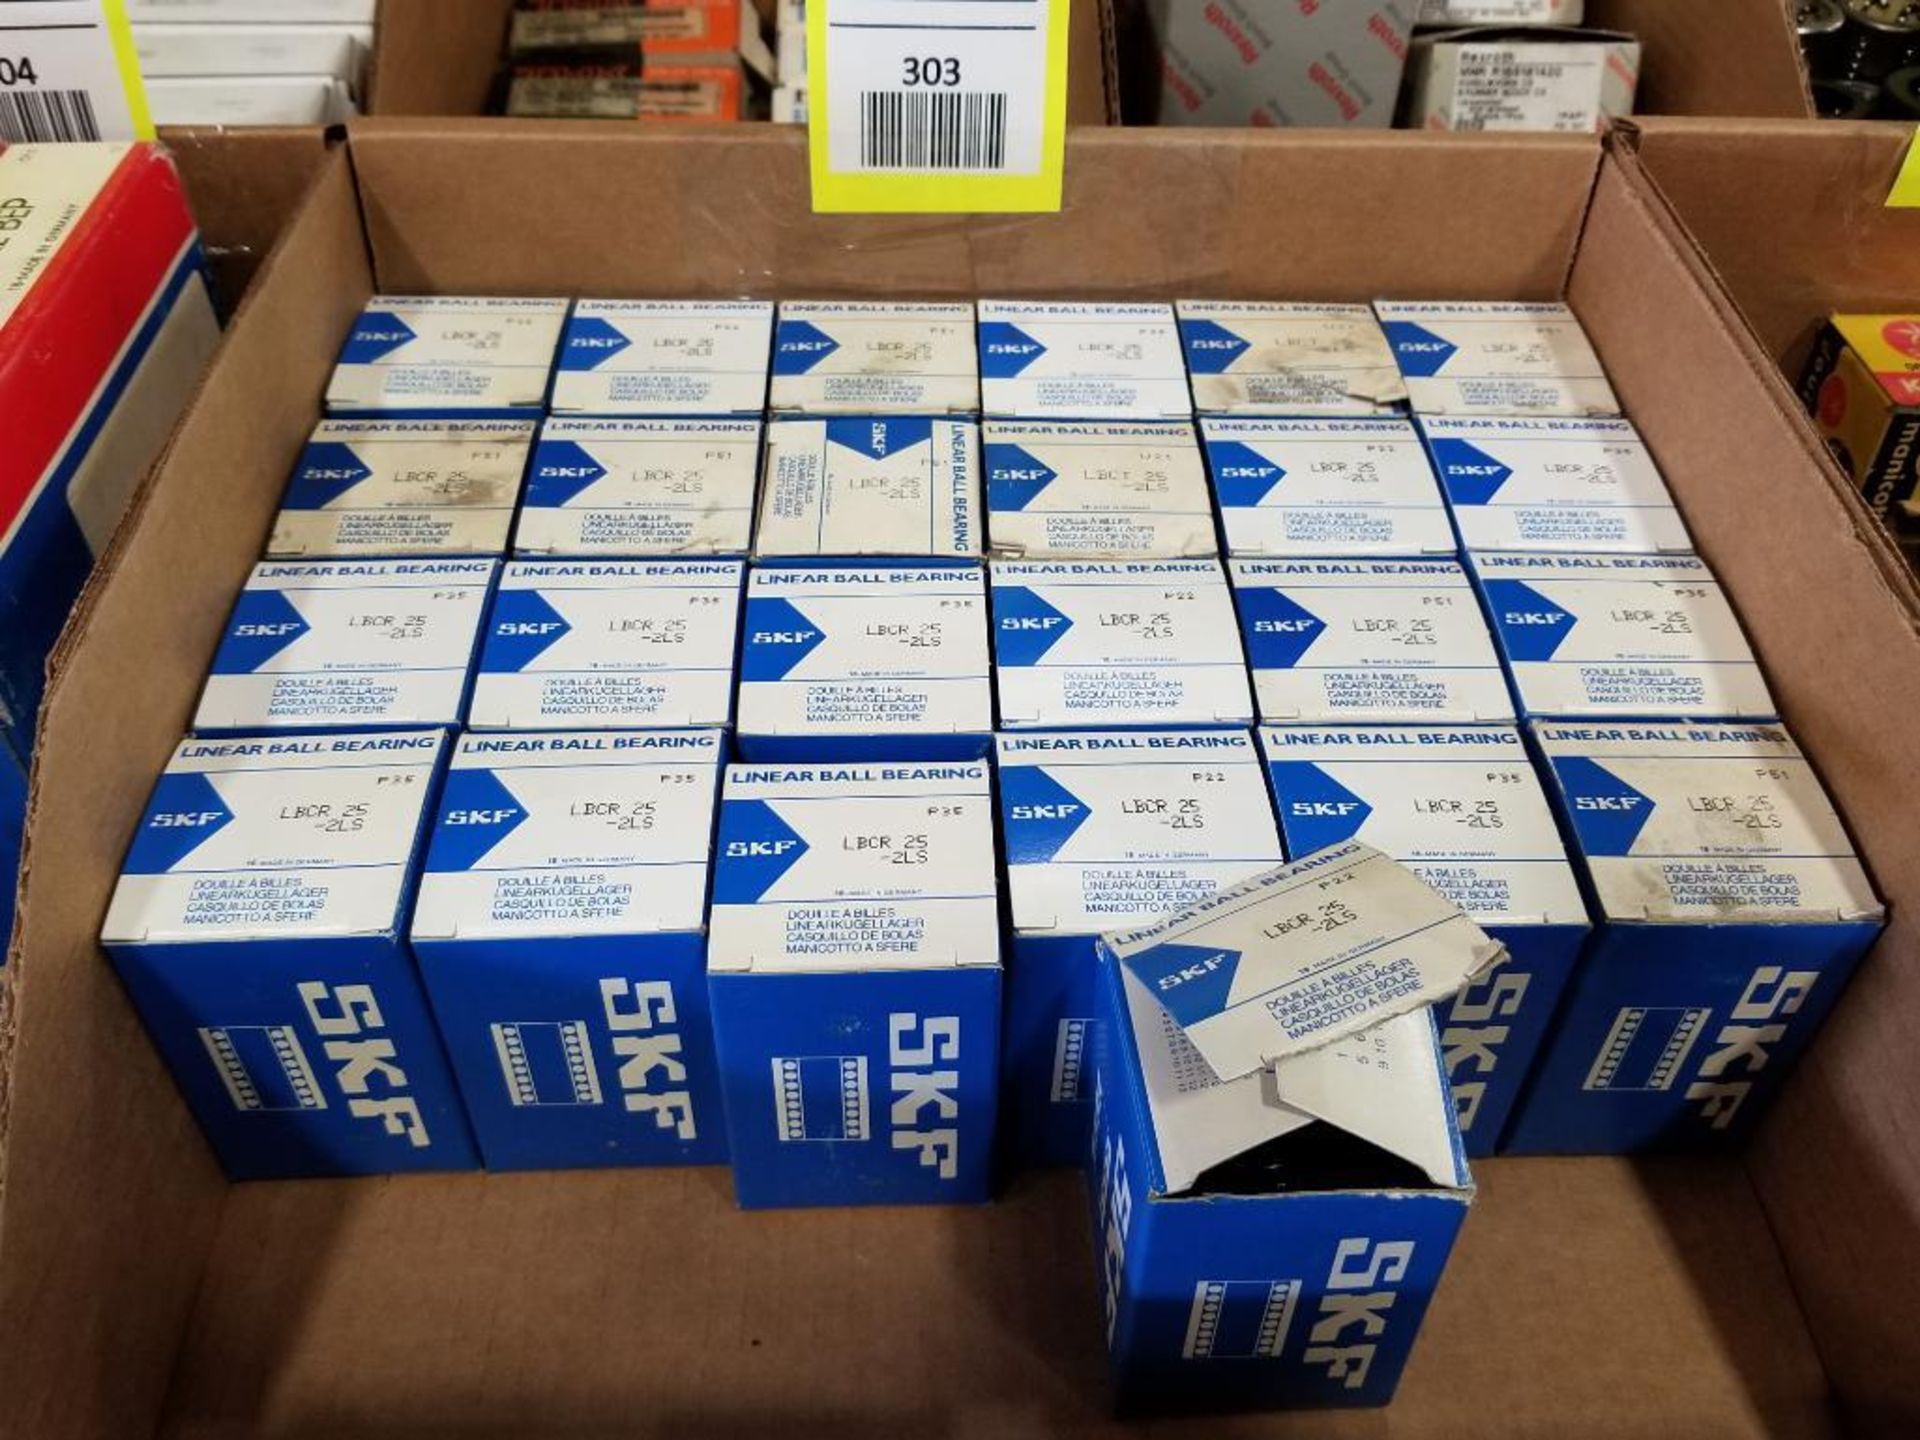 Qty 25 - SKF linear bearings. Part number LBCR-25-2LS. New in box.